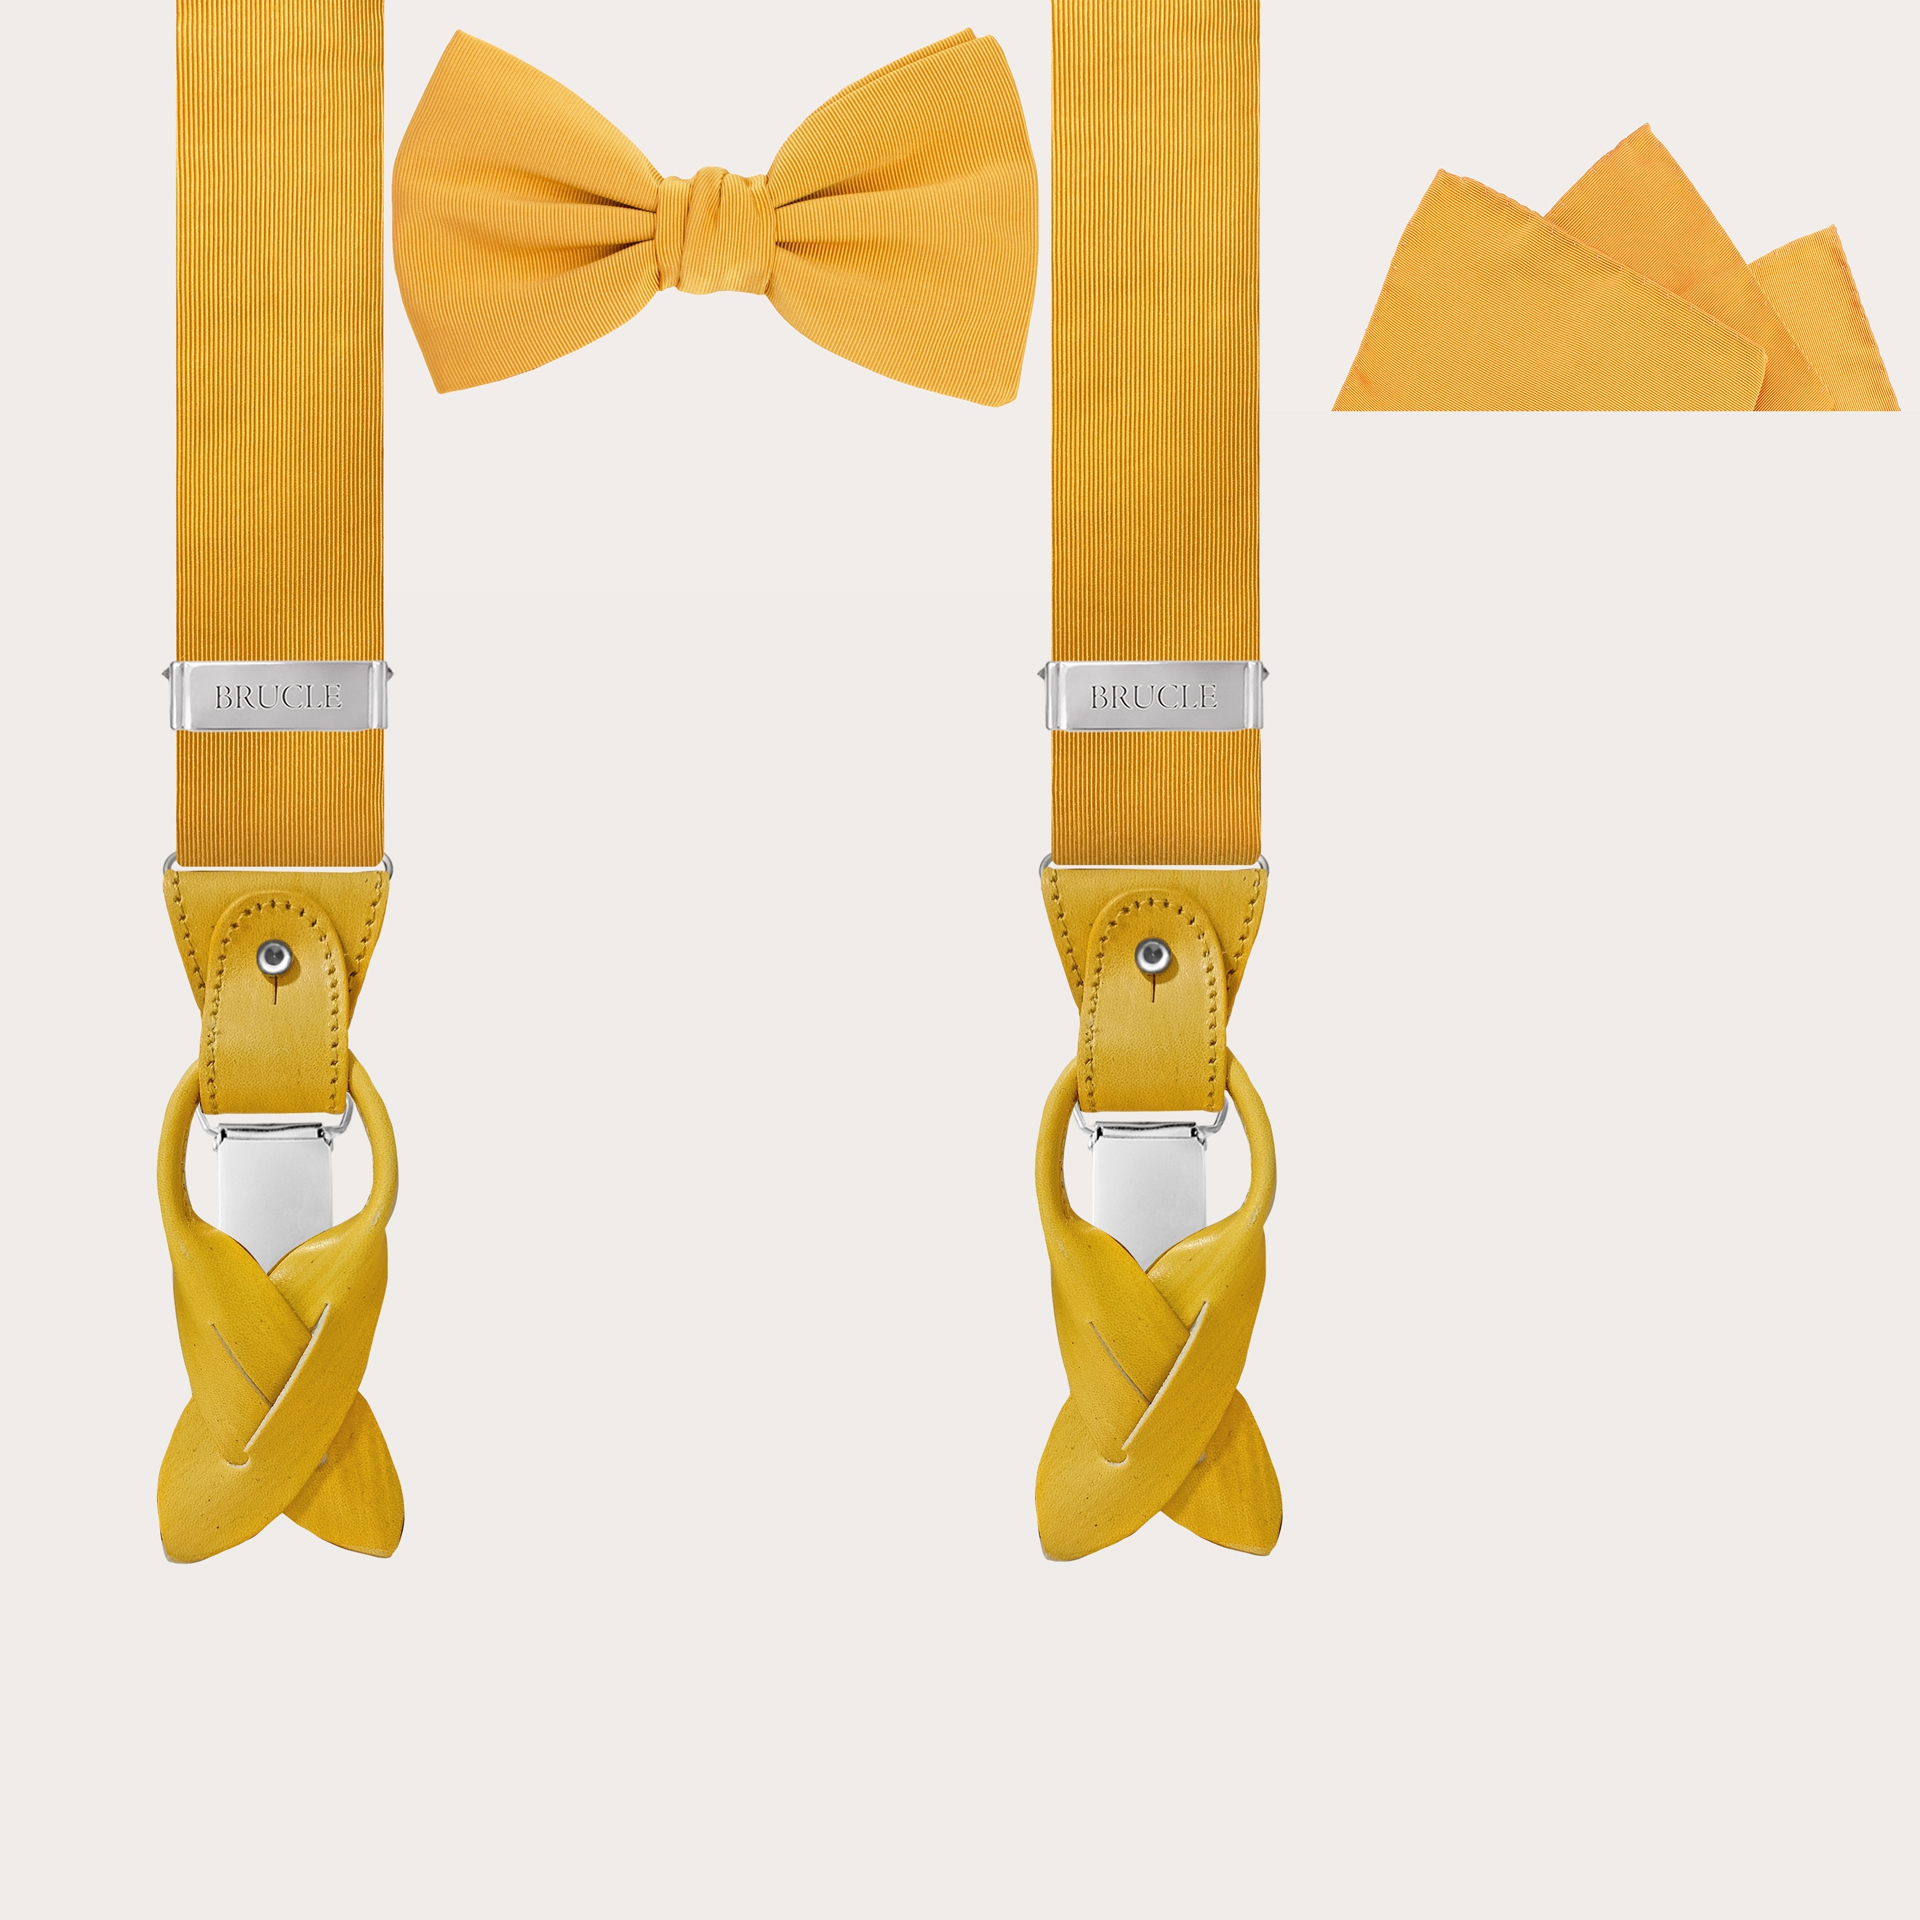 BRUCLE Elegant set of suspenders, bow tie and pocket square in silk, yellow